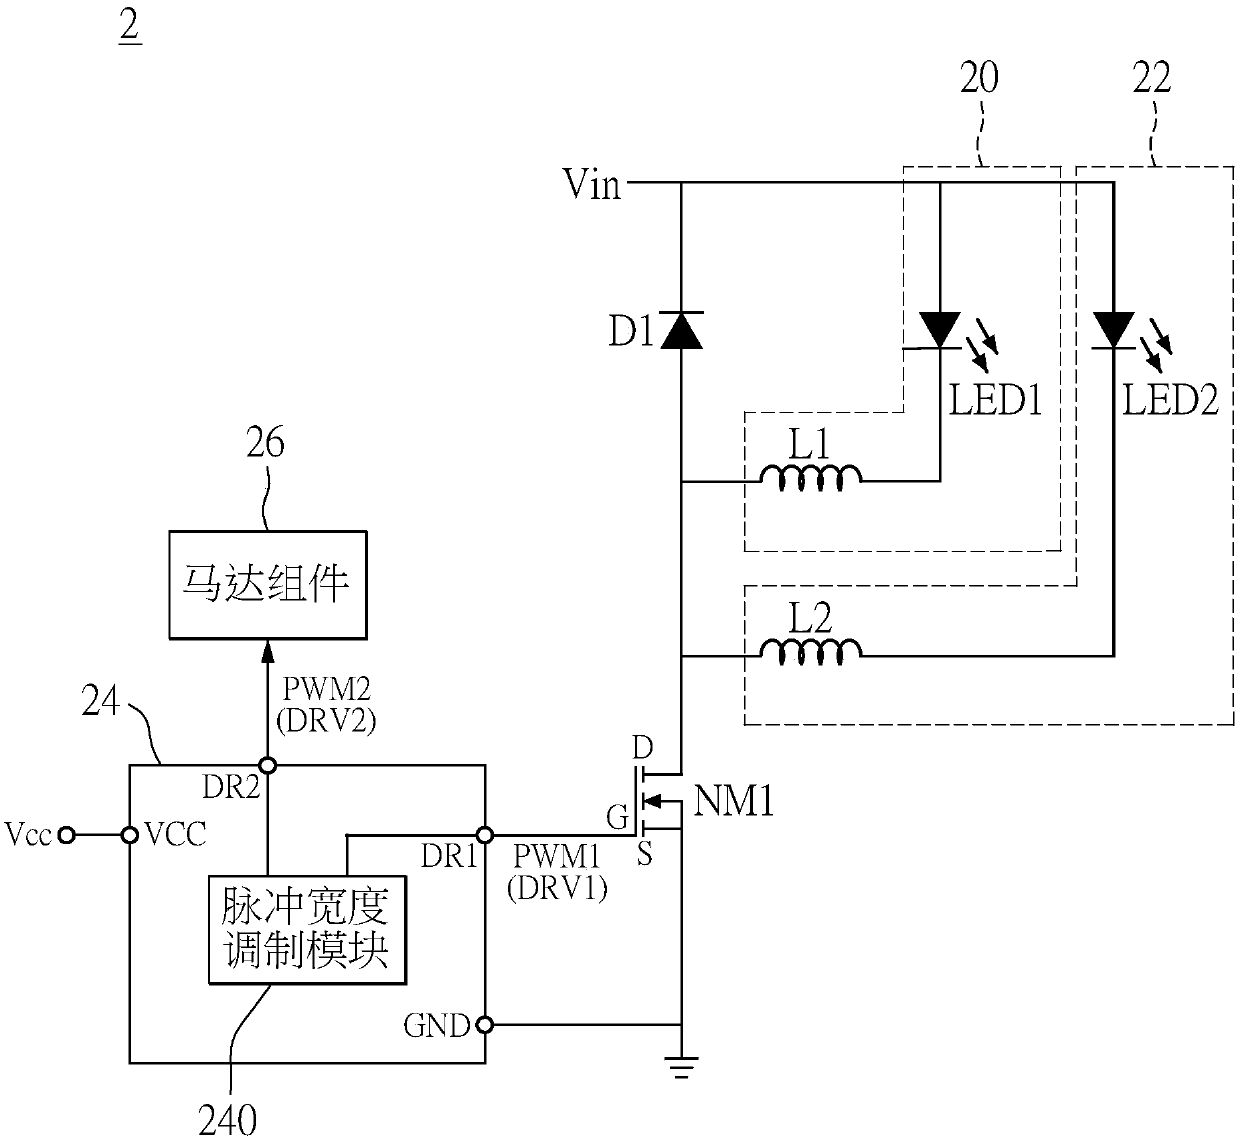 Parallel LED current-sharing circuit of motor driving system